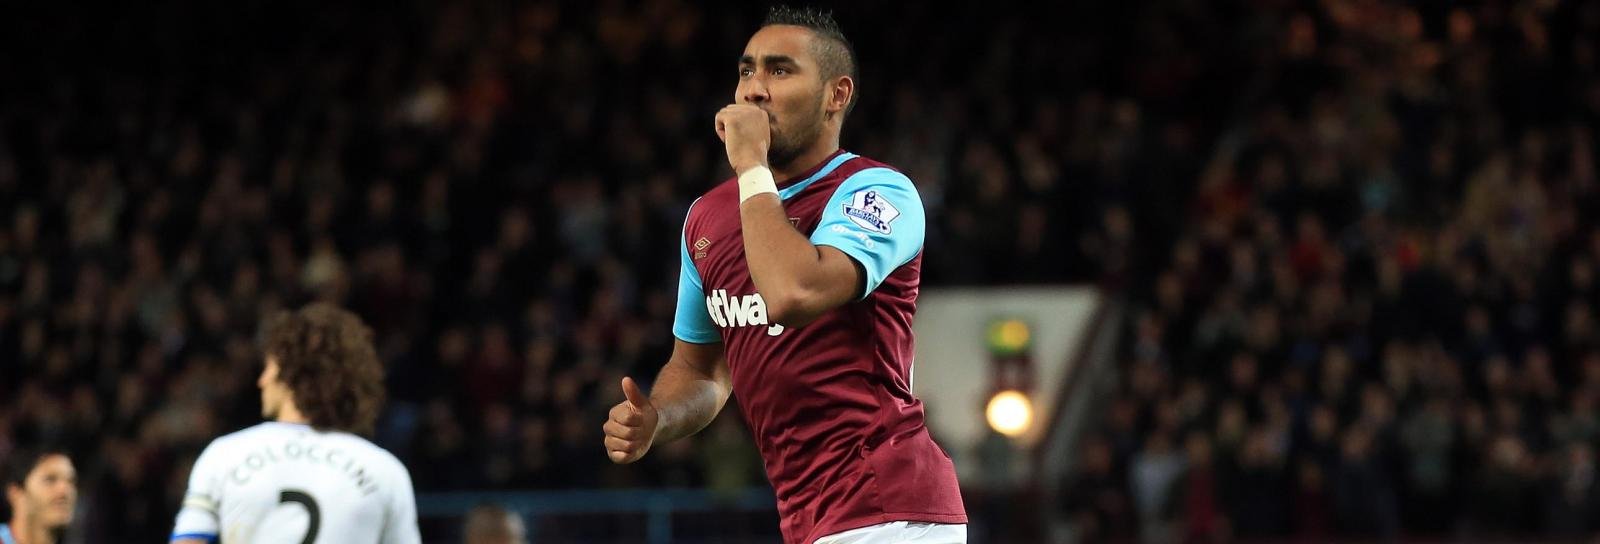 New Hammers’ half-term reports – Payet top of the class